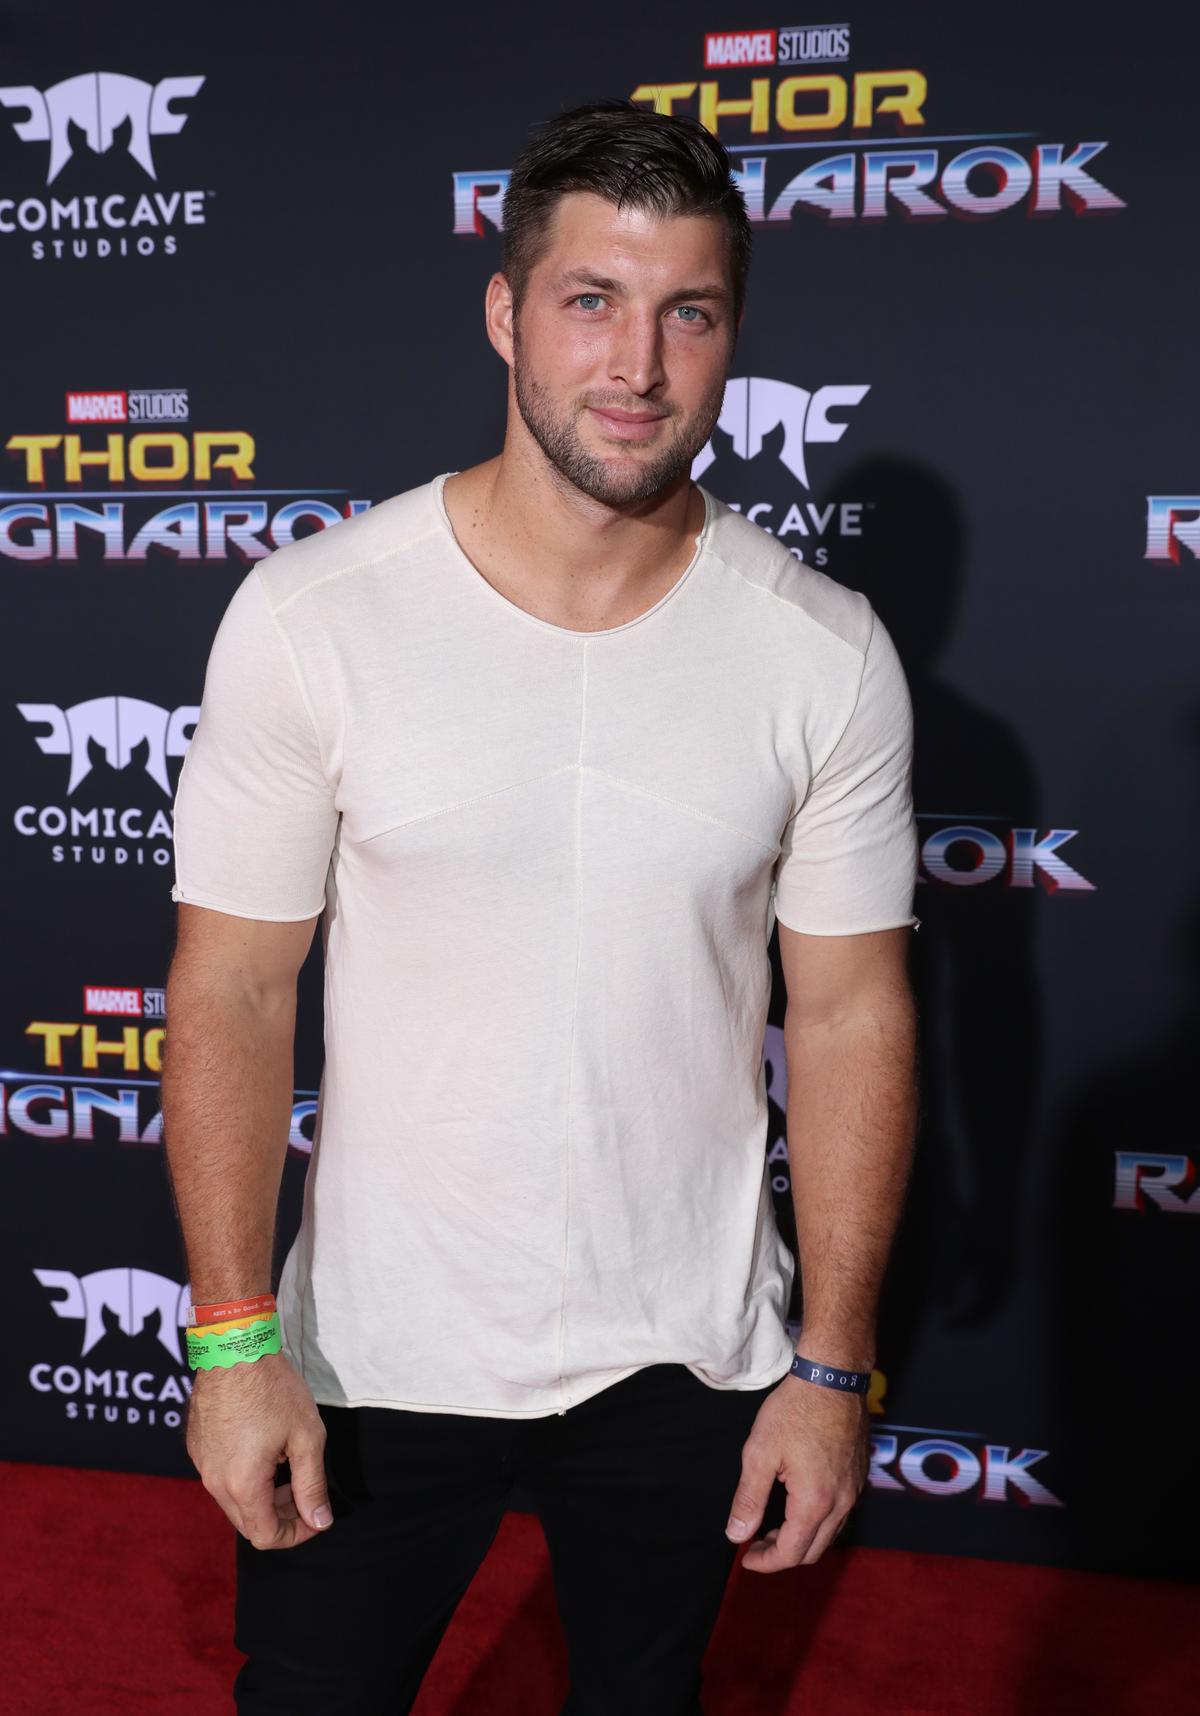  Tebow at The World Premiere of Marvel Studios' "Thor: Ragnarok" at the El Capitan Theatre in Hollywood, California, on Oct. 10, 2017 (Rich Polk/Getty Images)